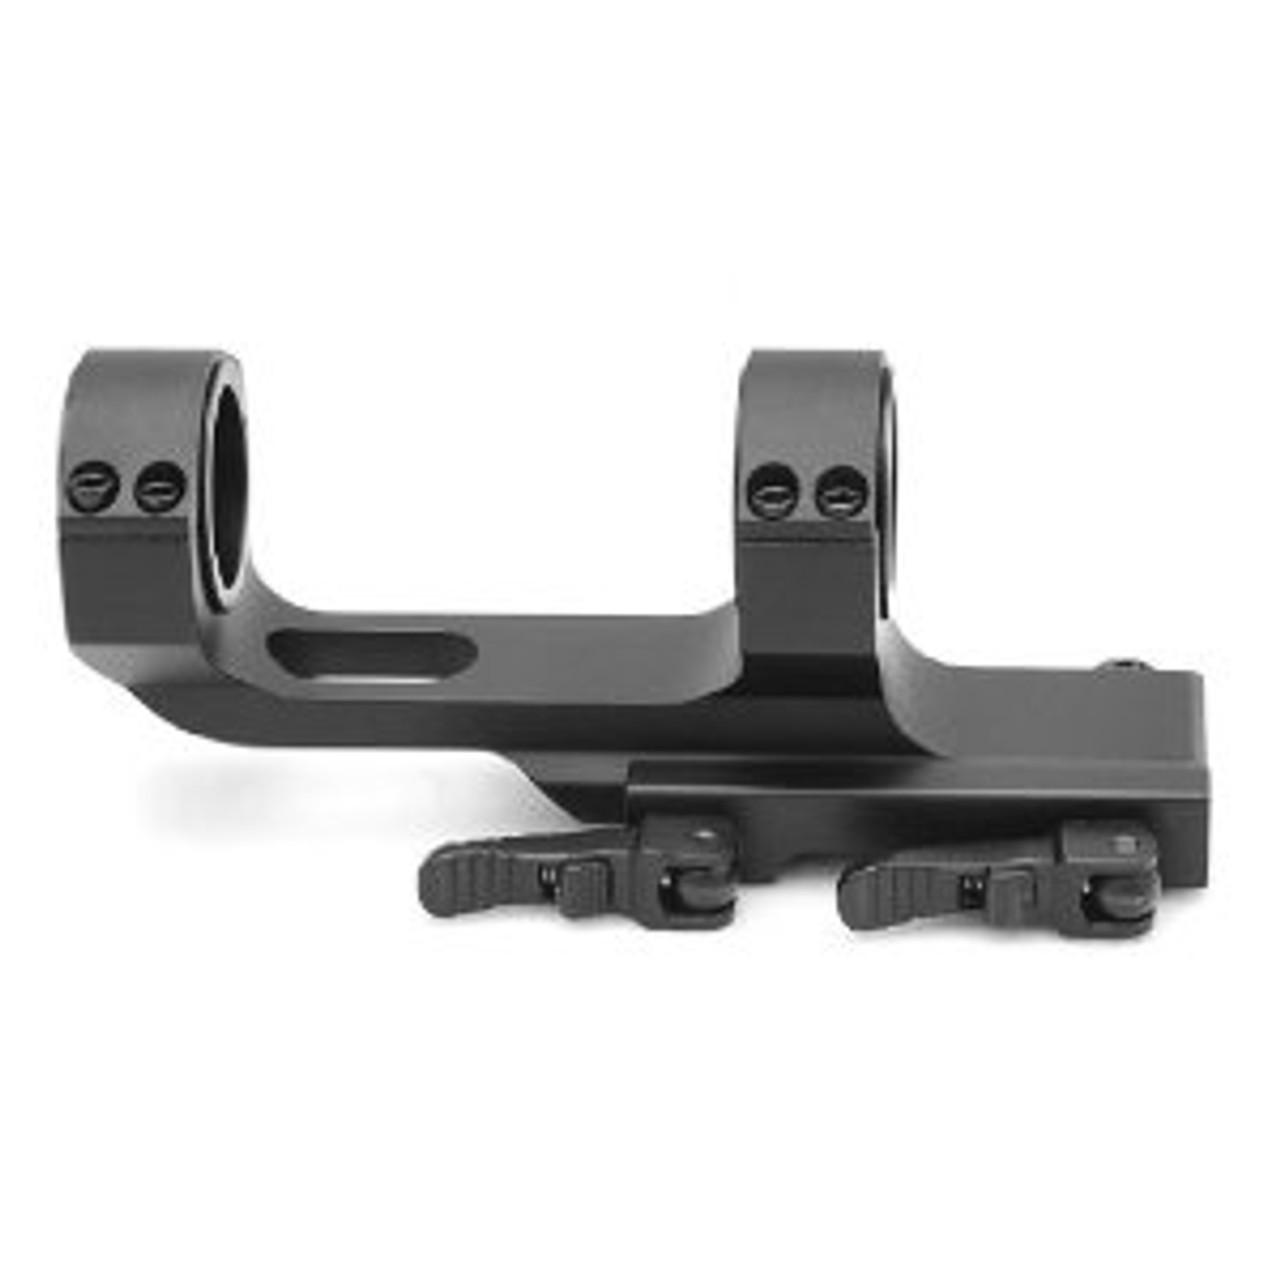 Ar15 Flat Top Offset One Piece Qd Scope Mount With 1913 Picatinny Rail ...